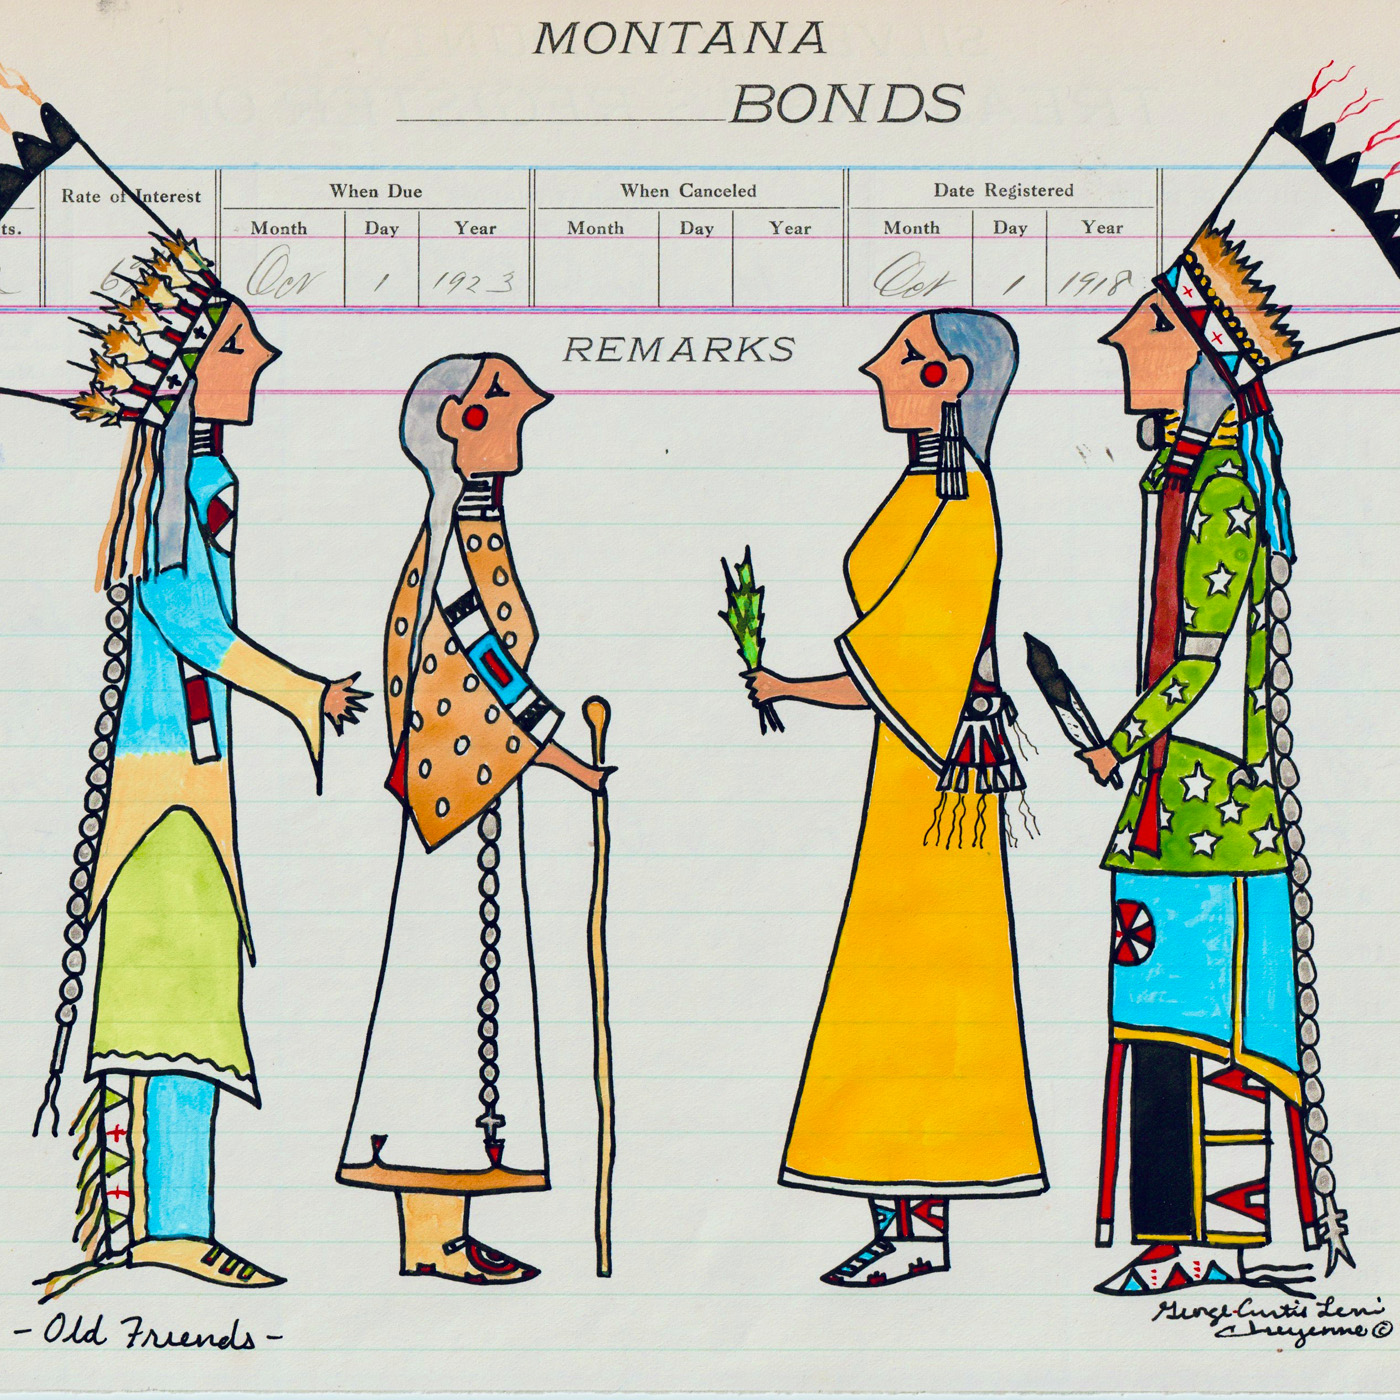 Original artwork by George Curtis Levi entitled ‘Old Friends’. The drawing shows 4 indigenous figures facing one another and is based on traditional Cheyenne Ledger Art.